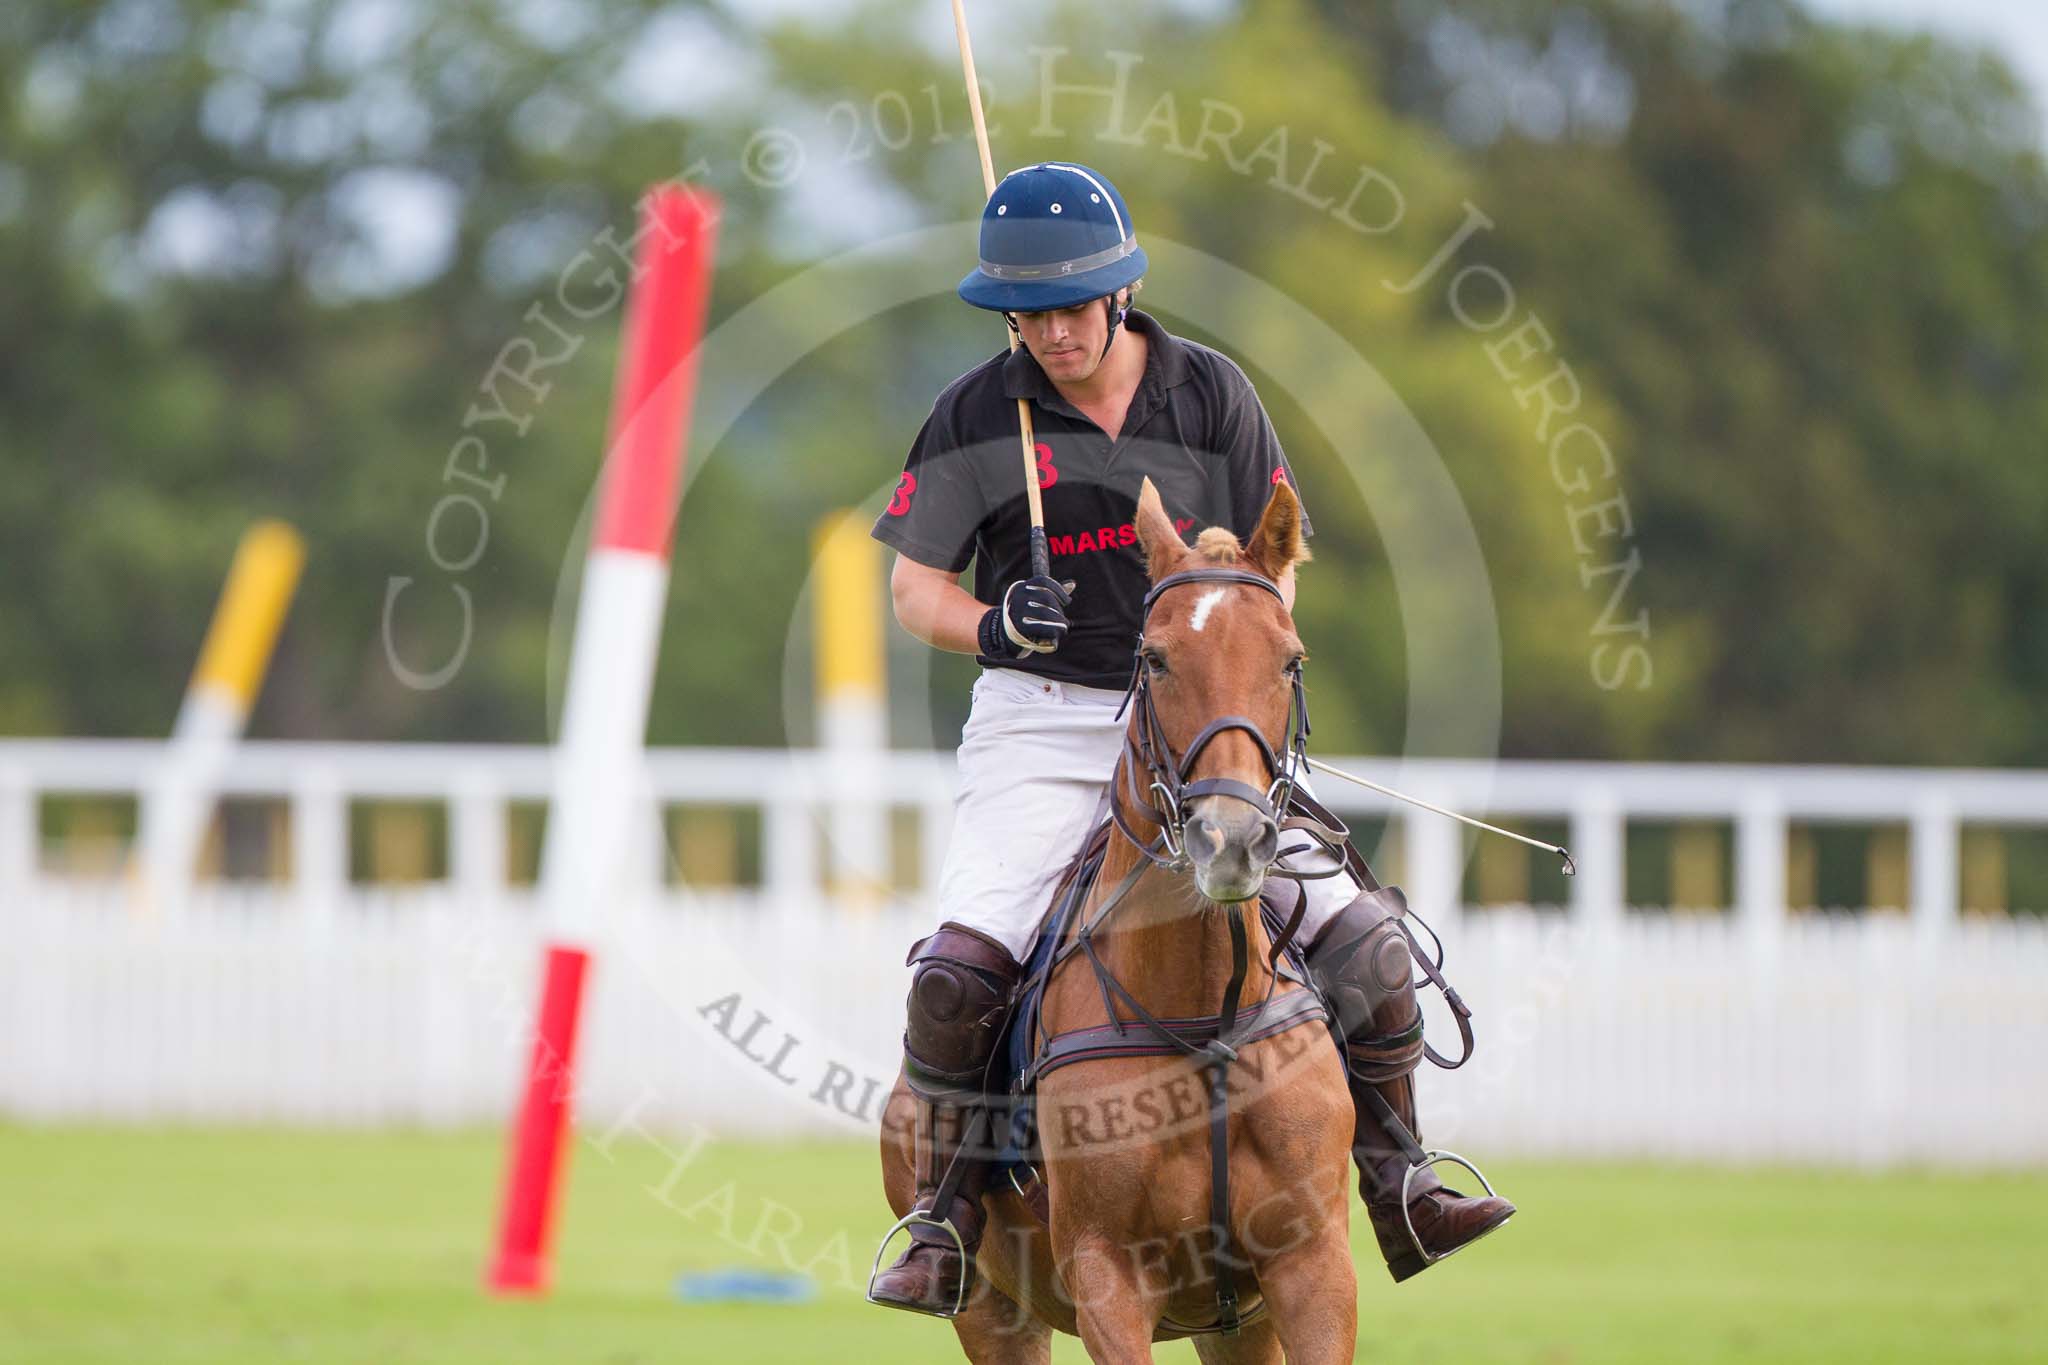 DBPC Polo in the Park 2012: Getting ready for the first match - Simon Marlow-Thomas of the Marston team..
Dallas Burston Polo Club,
Stoneythorpe Estate,
Southam,
Warwickshire,
United Kingdom,
on 16 September 2012 at 10:06, image #28